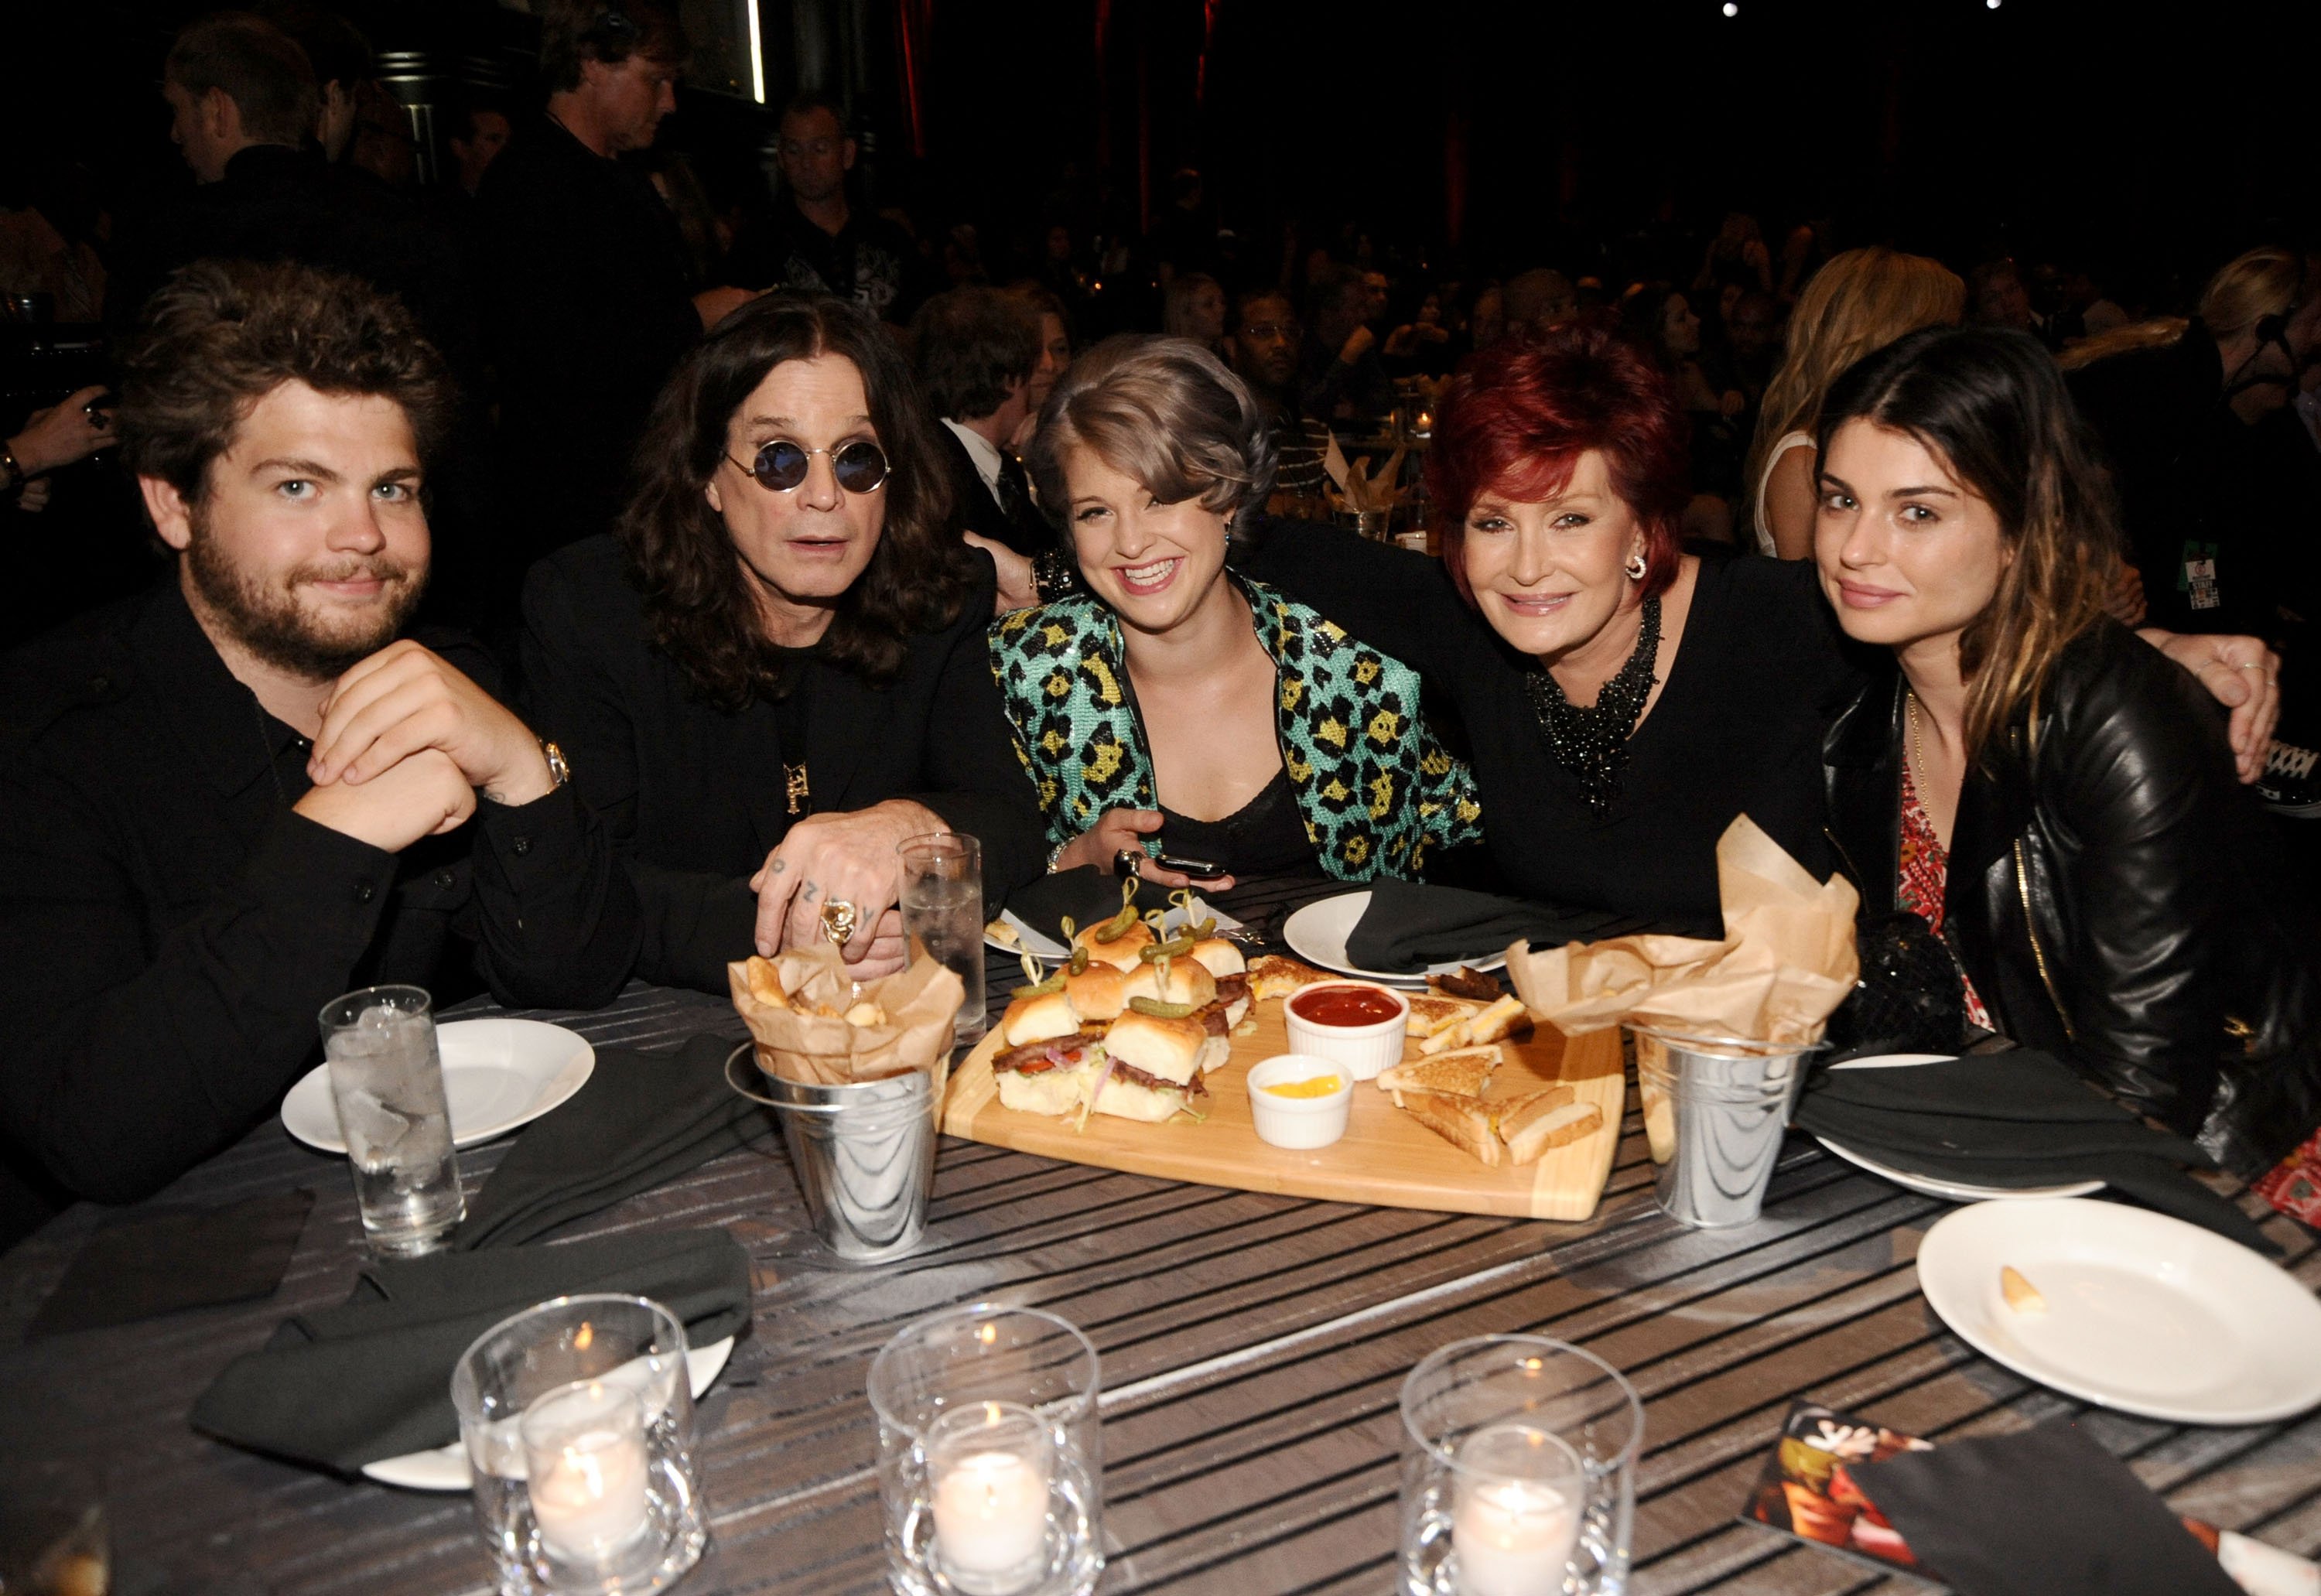 Pictured: (From left to right) Jack Osbourne, Ozzy Osbourne, Kelly Osbourne, Sharon Osbourne and Aimee Osbourne during Spike TV's 4th Annual "Guys Choice Awards" at Sony Studios on June 5, 2010 in Los Angeles, California. / Source: Getty Images